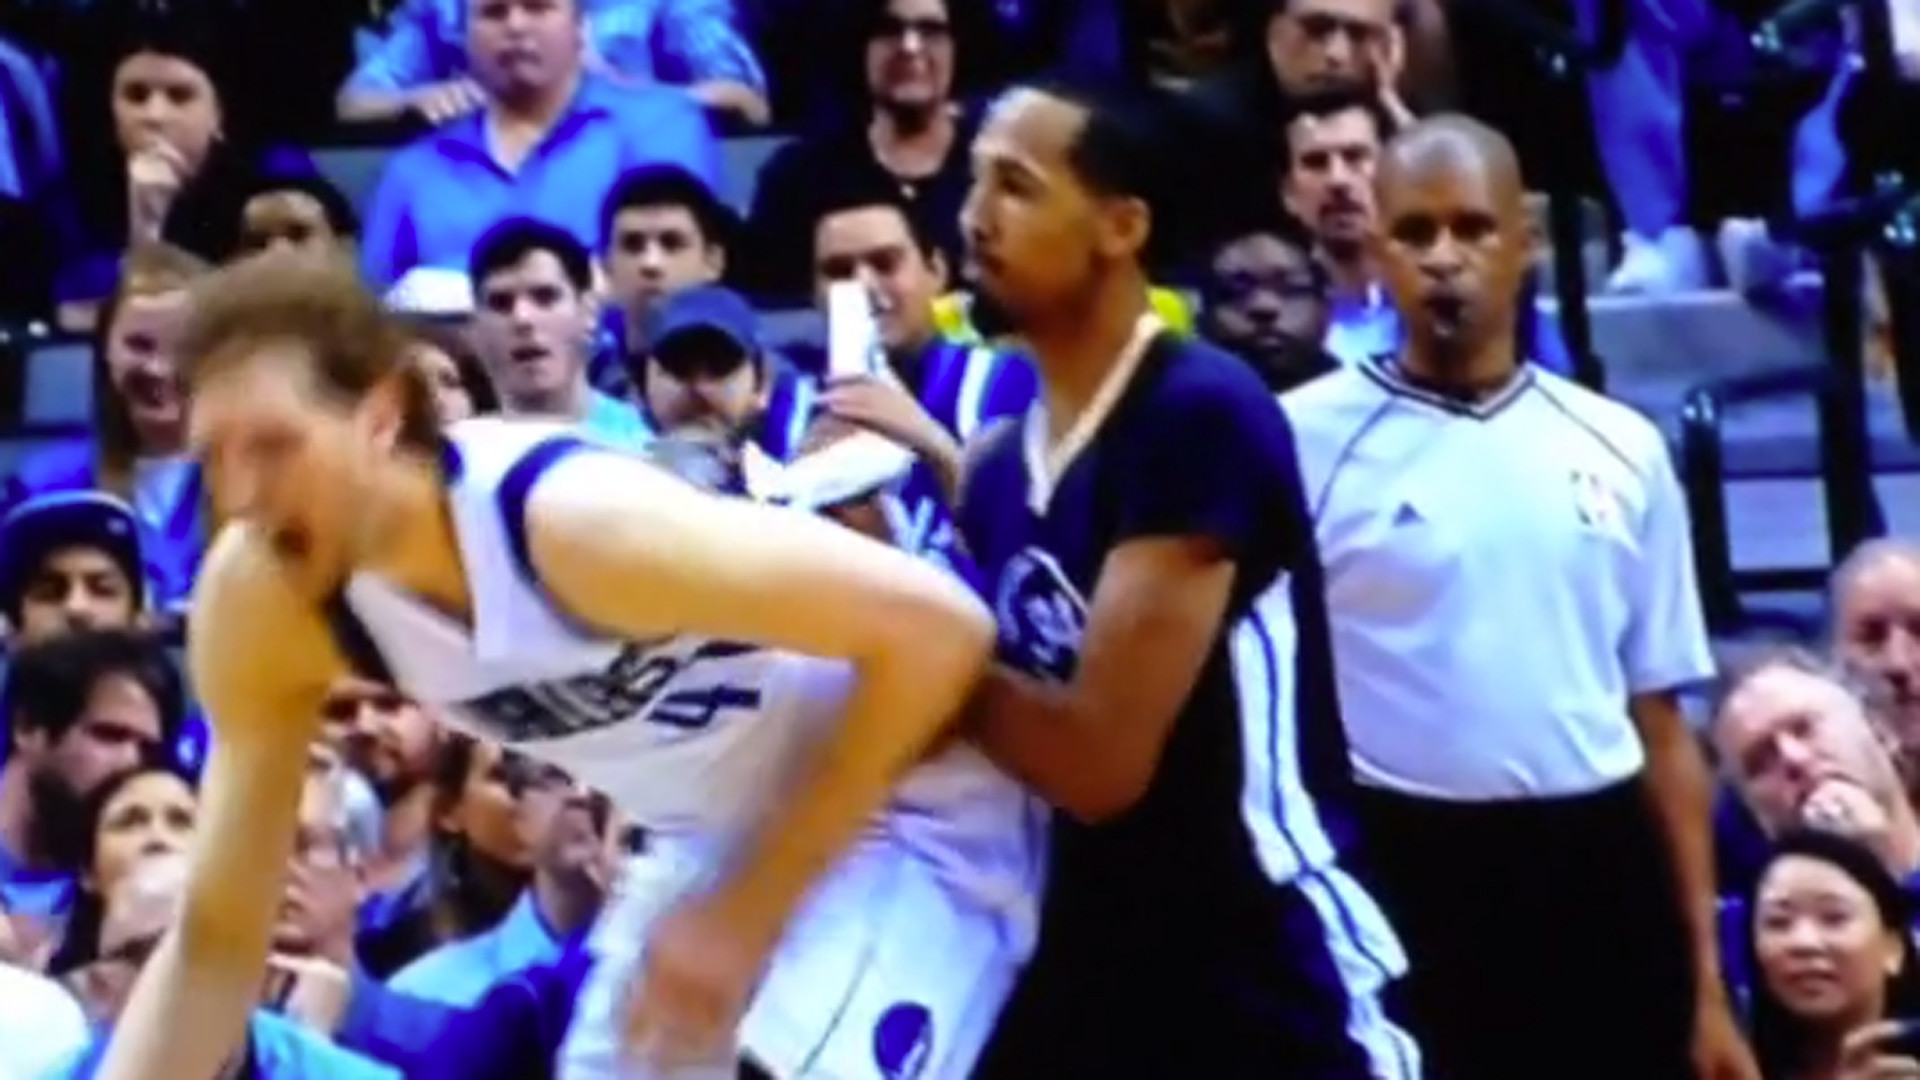 1920x1080 Shaun Livingston gets foul called for punching Dirk Nowitzki in the crotch  | NBA | Sporting News